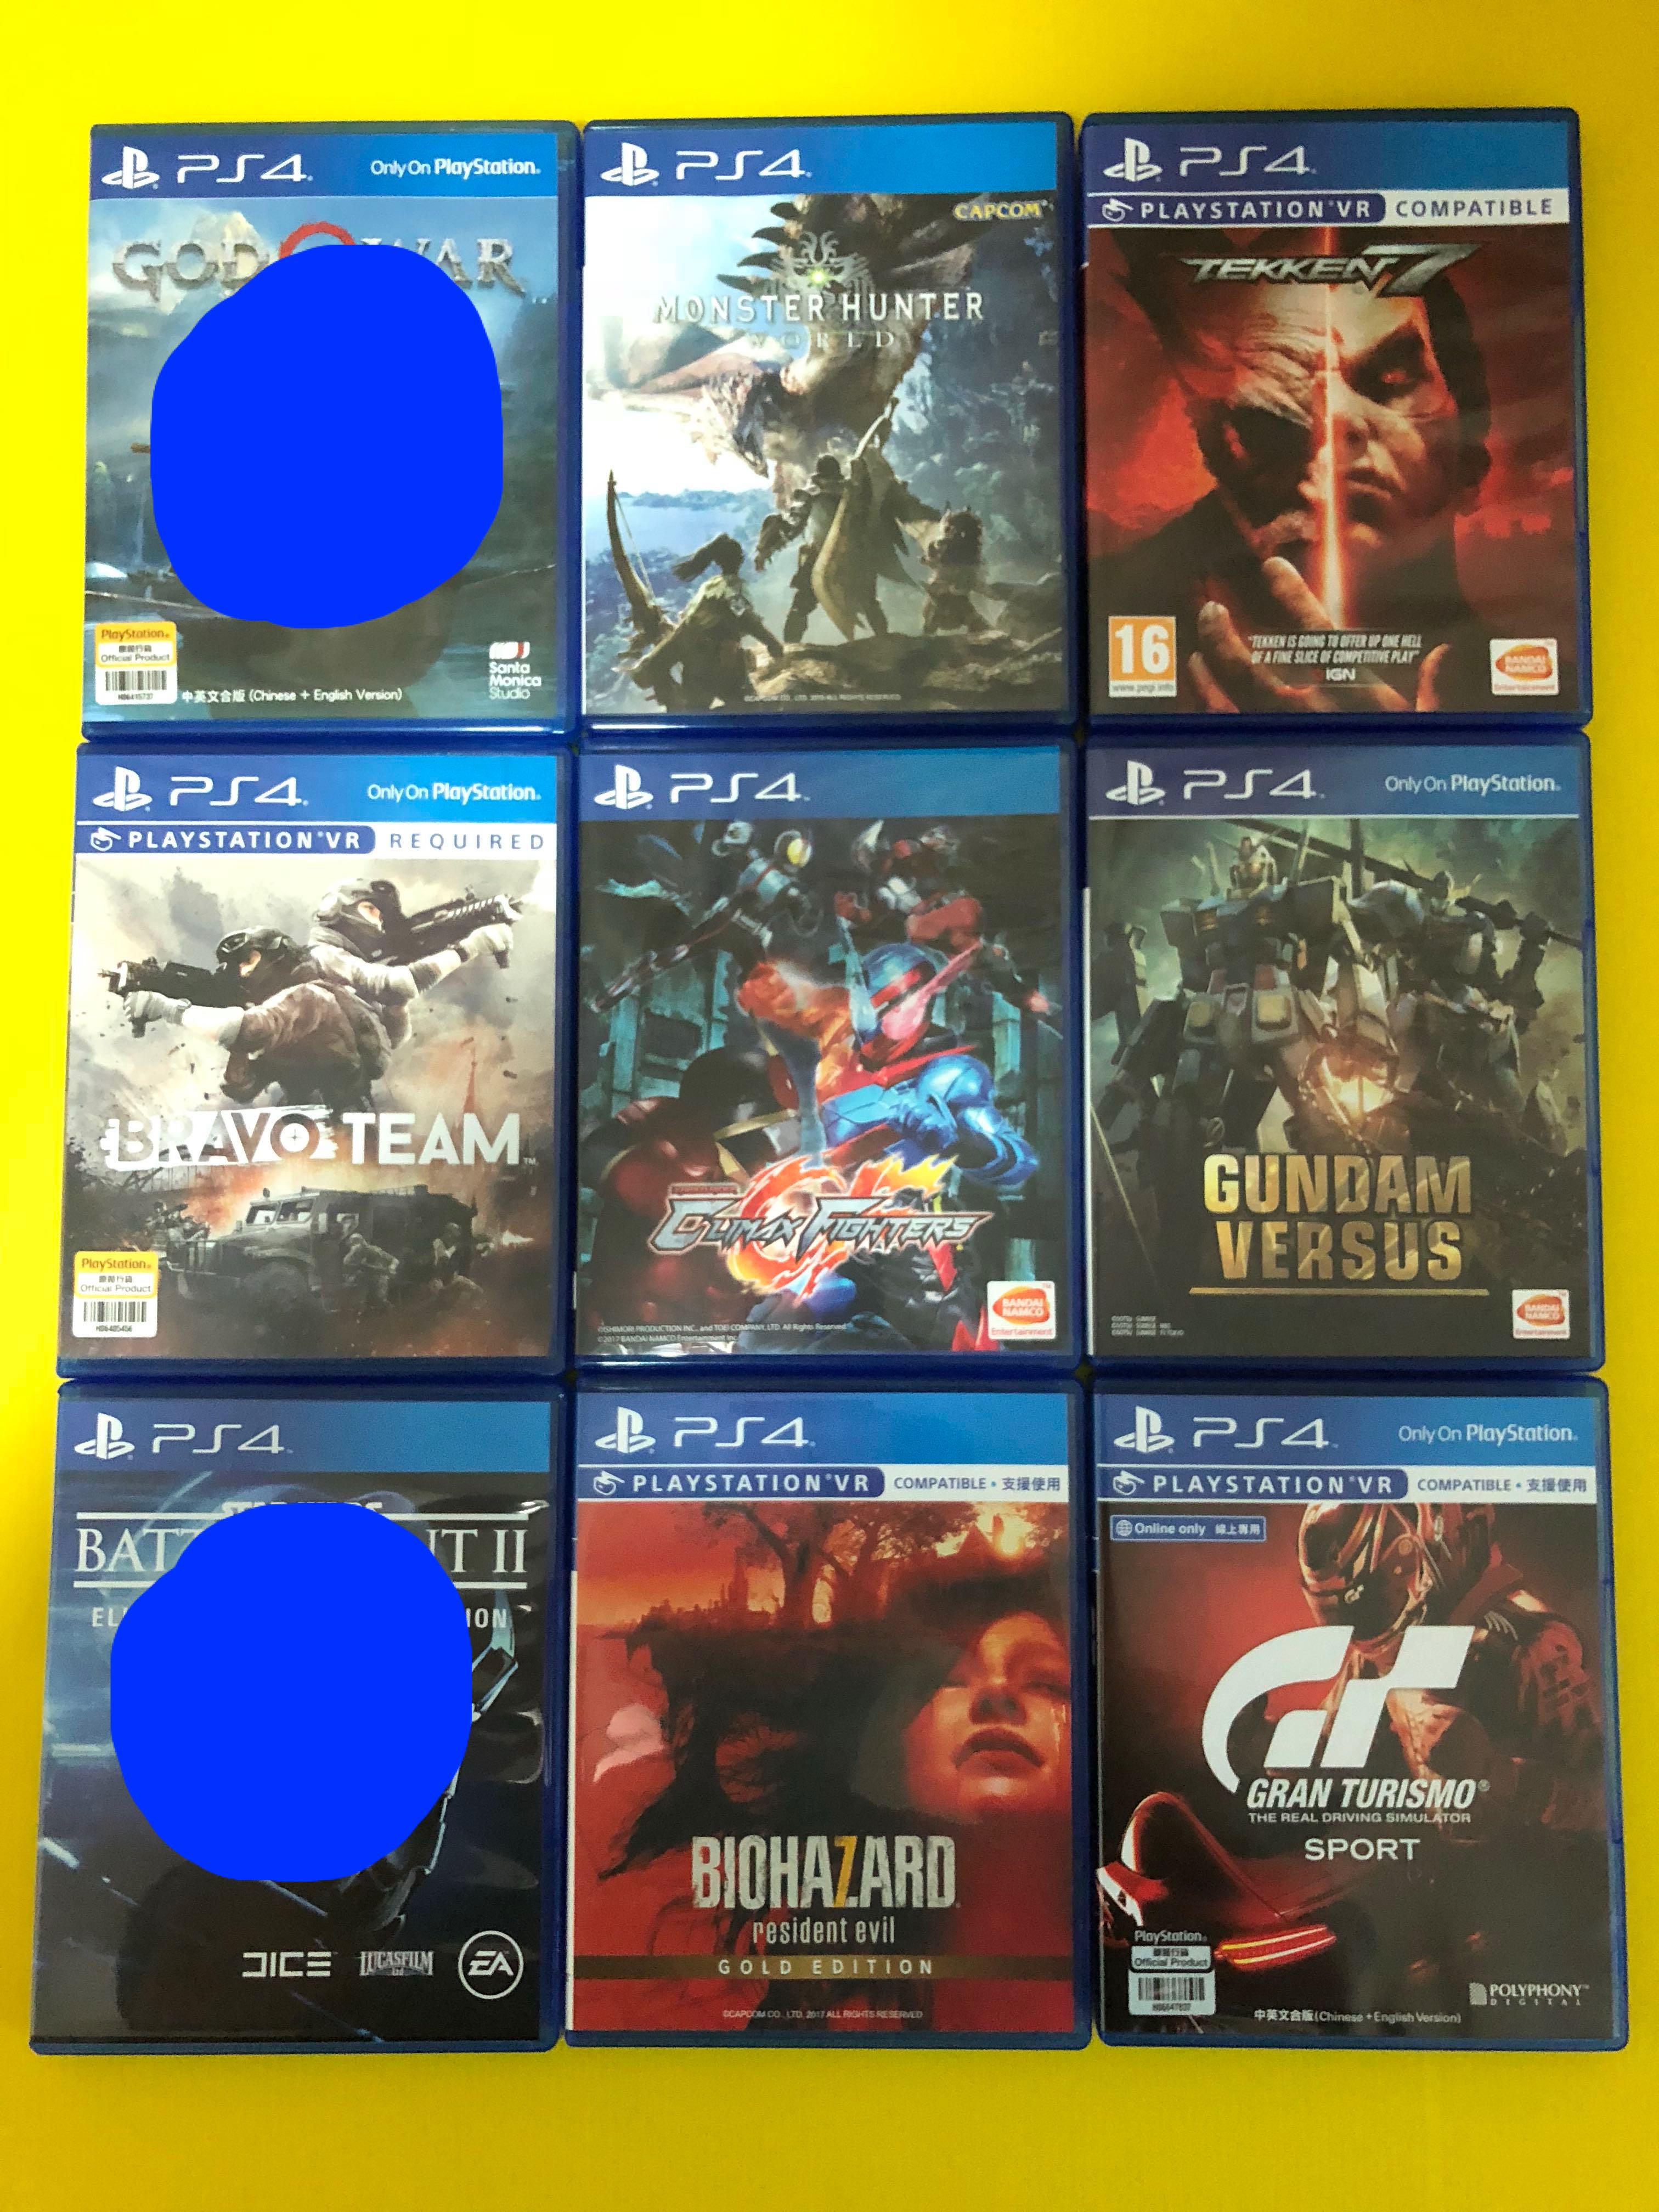 the latest ps4 games